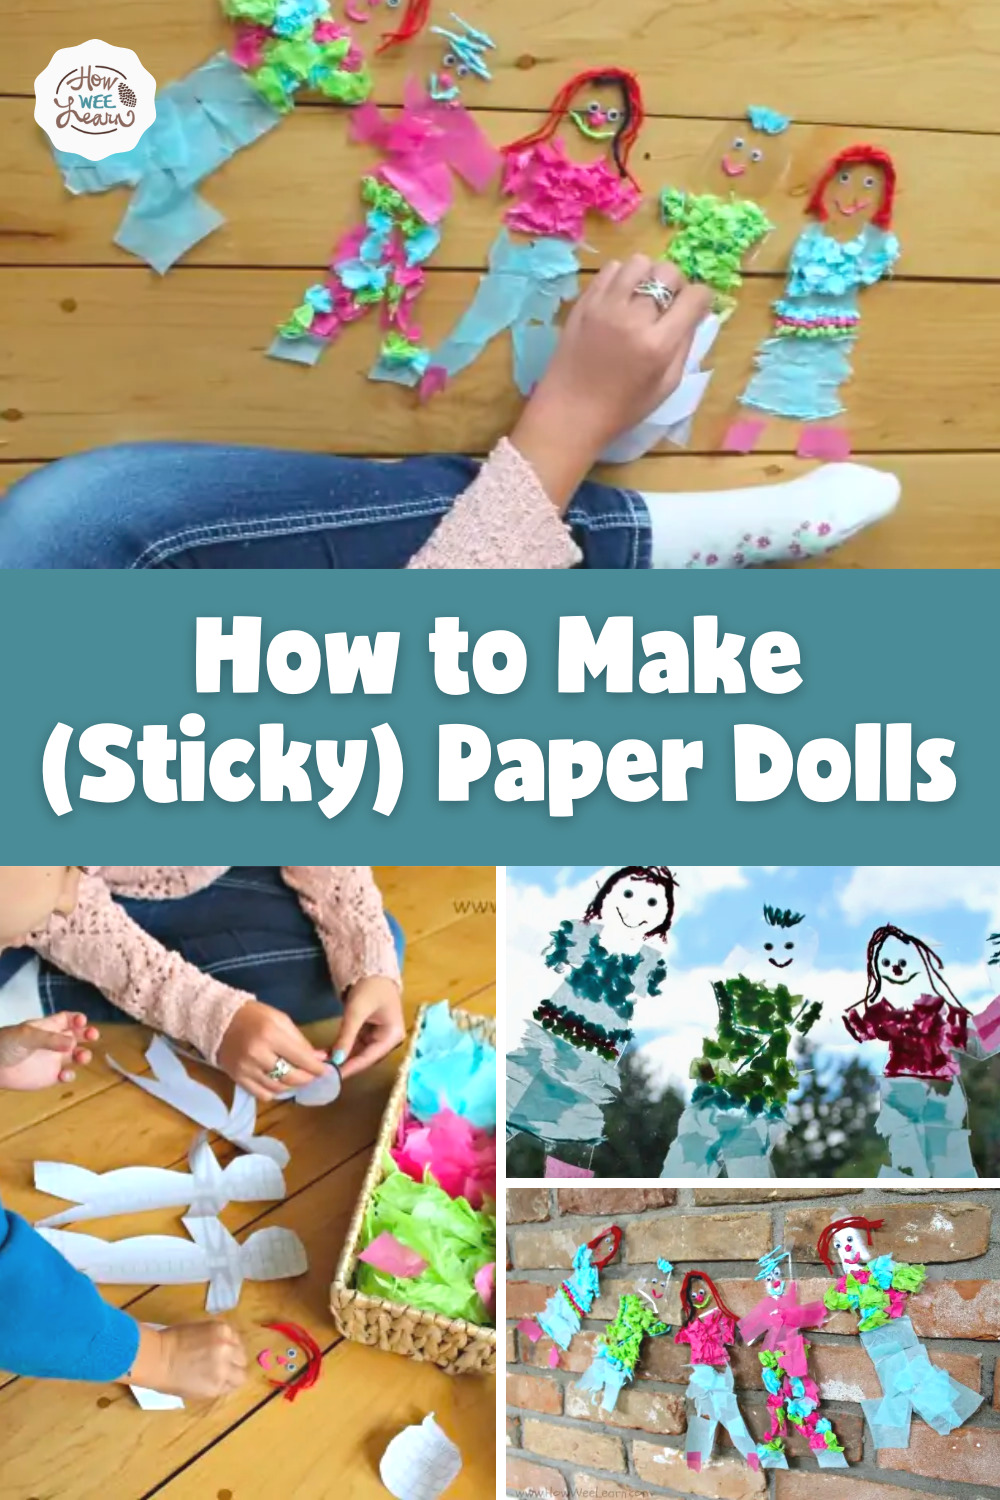 How to Make (Sticky) Paper Dolls